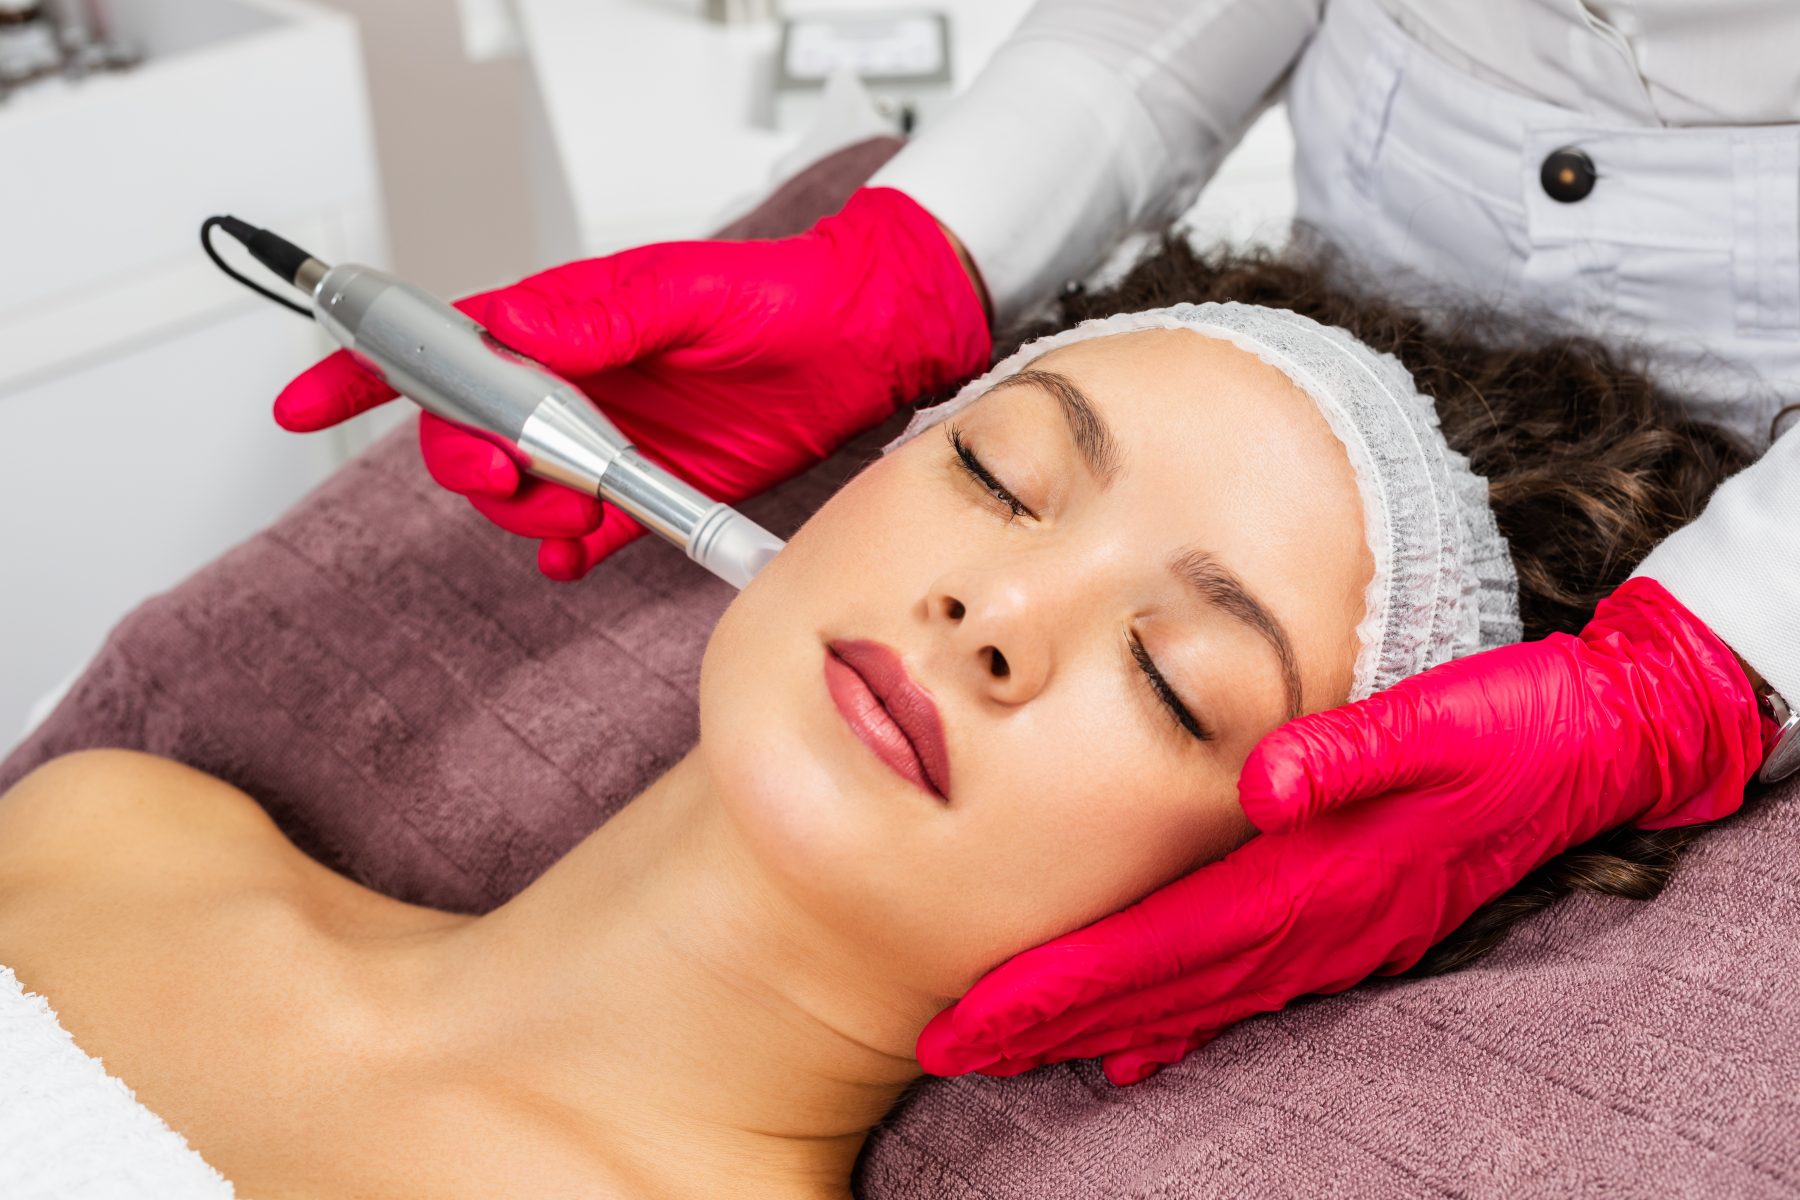 Woman receiving microneedling rejuvenation treatment also known as a vampire facial